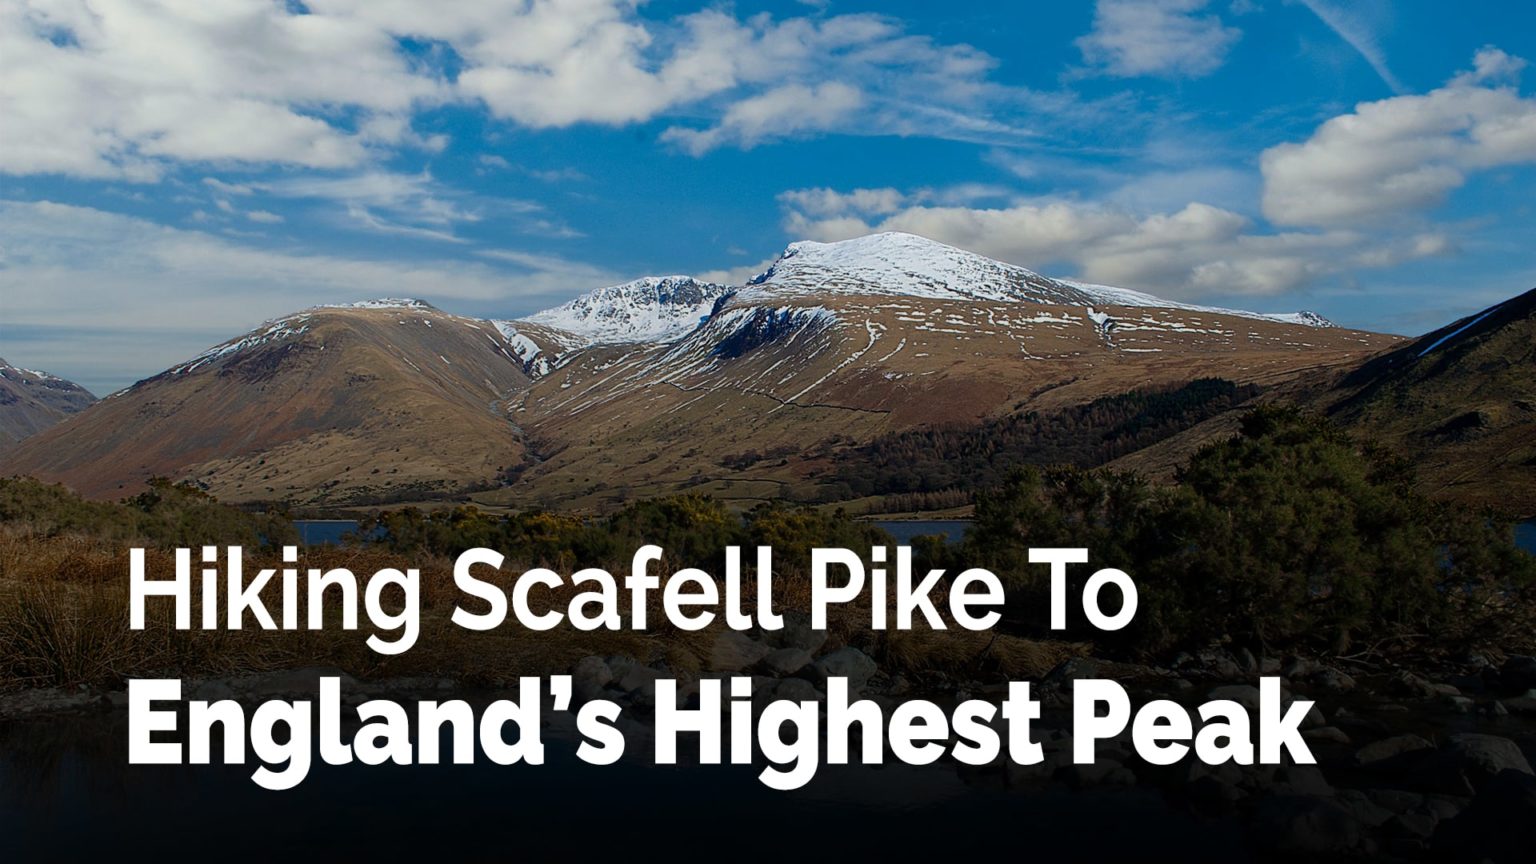 Hiking Scafell Pike To England’s Highest Peak